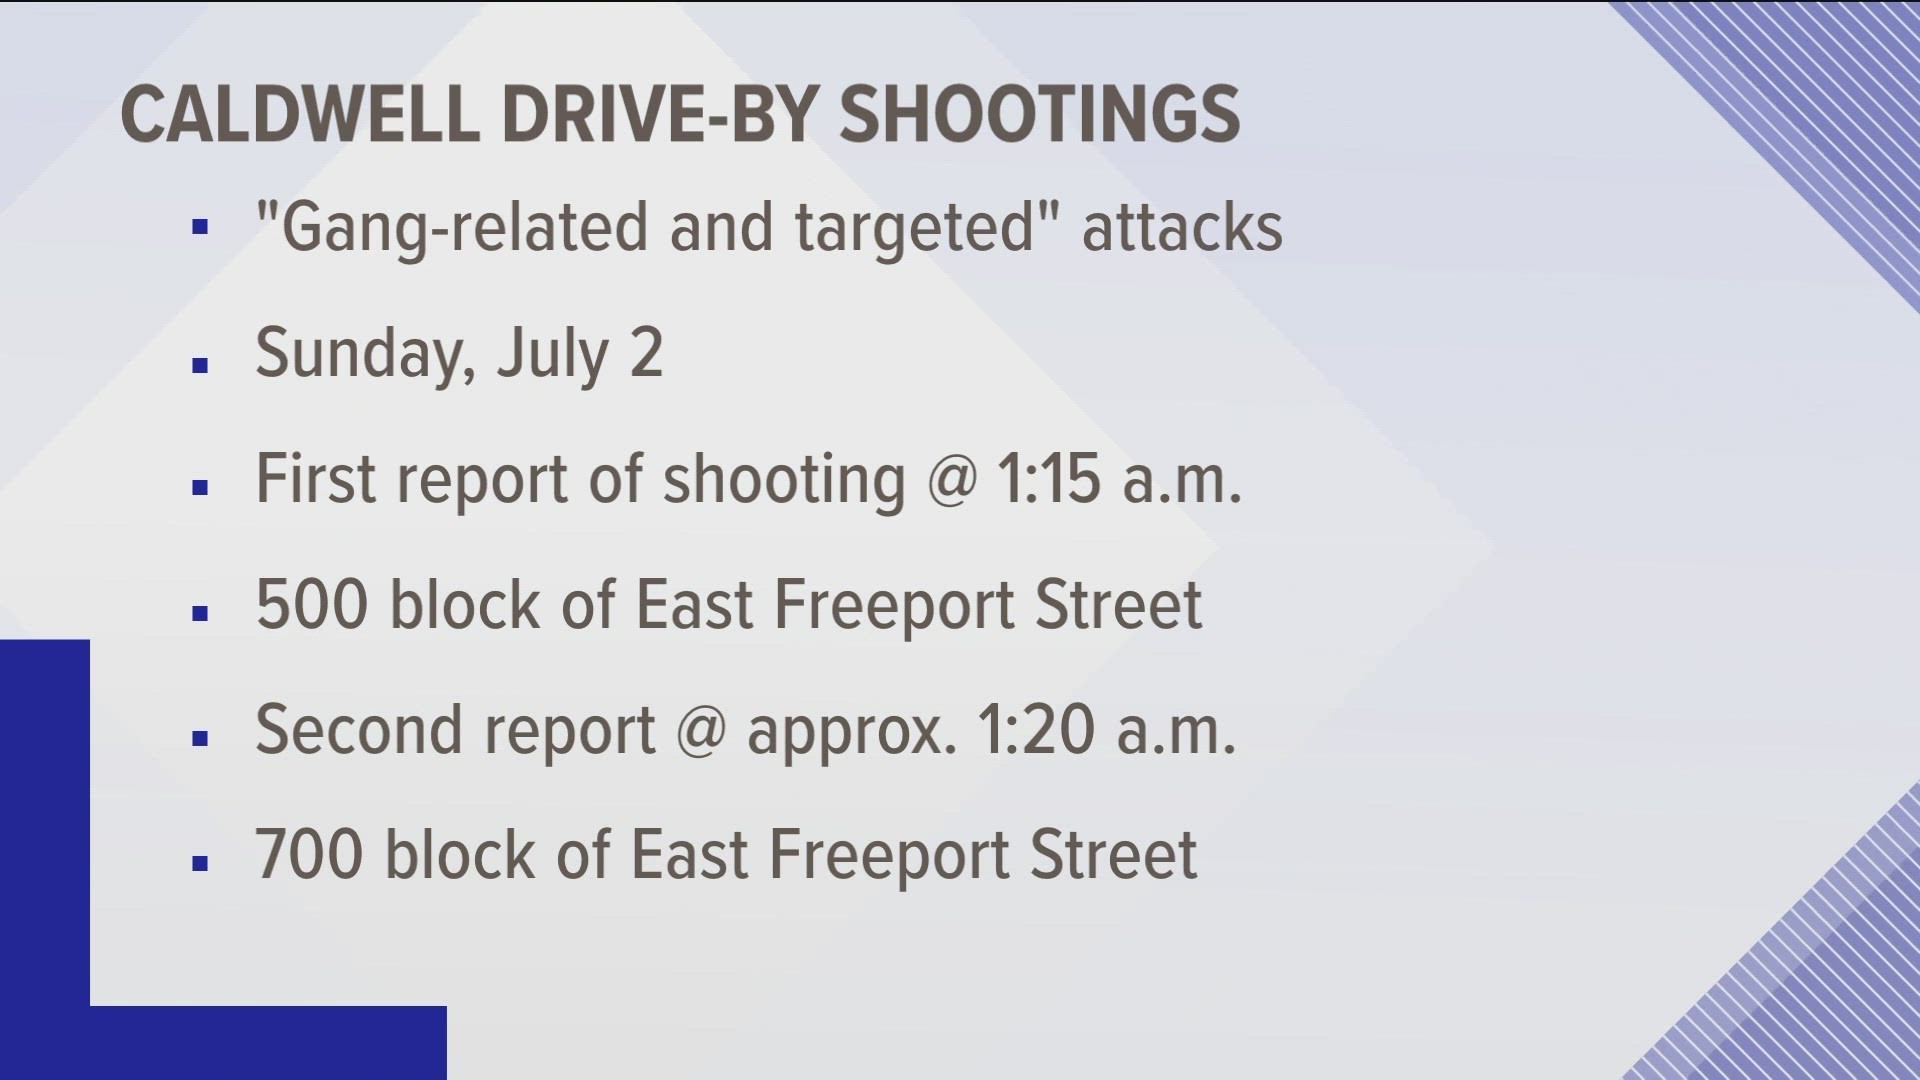 No one was injured in the shootings on Freeport Street, which police believe were gang-related.